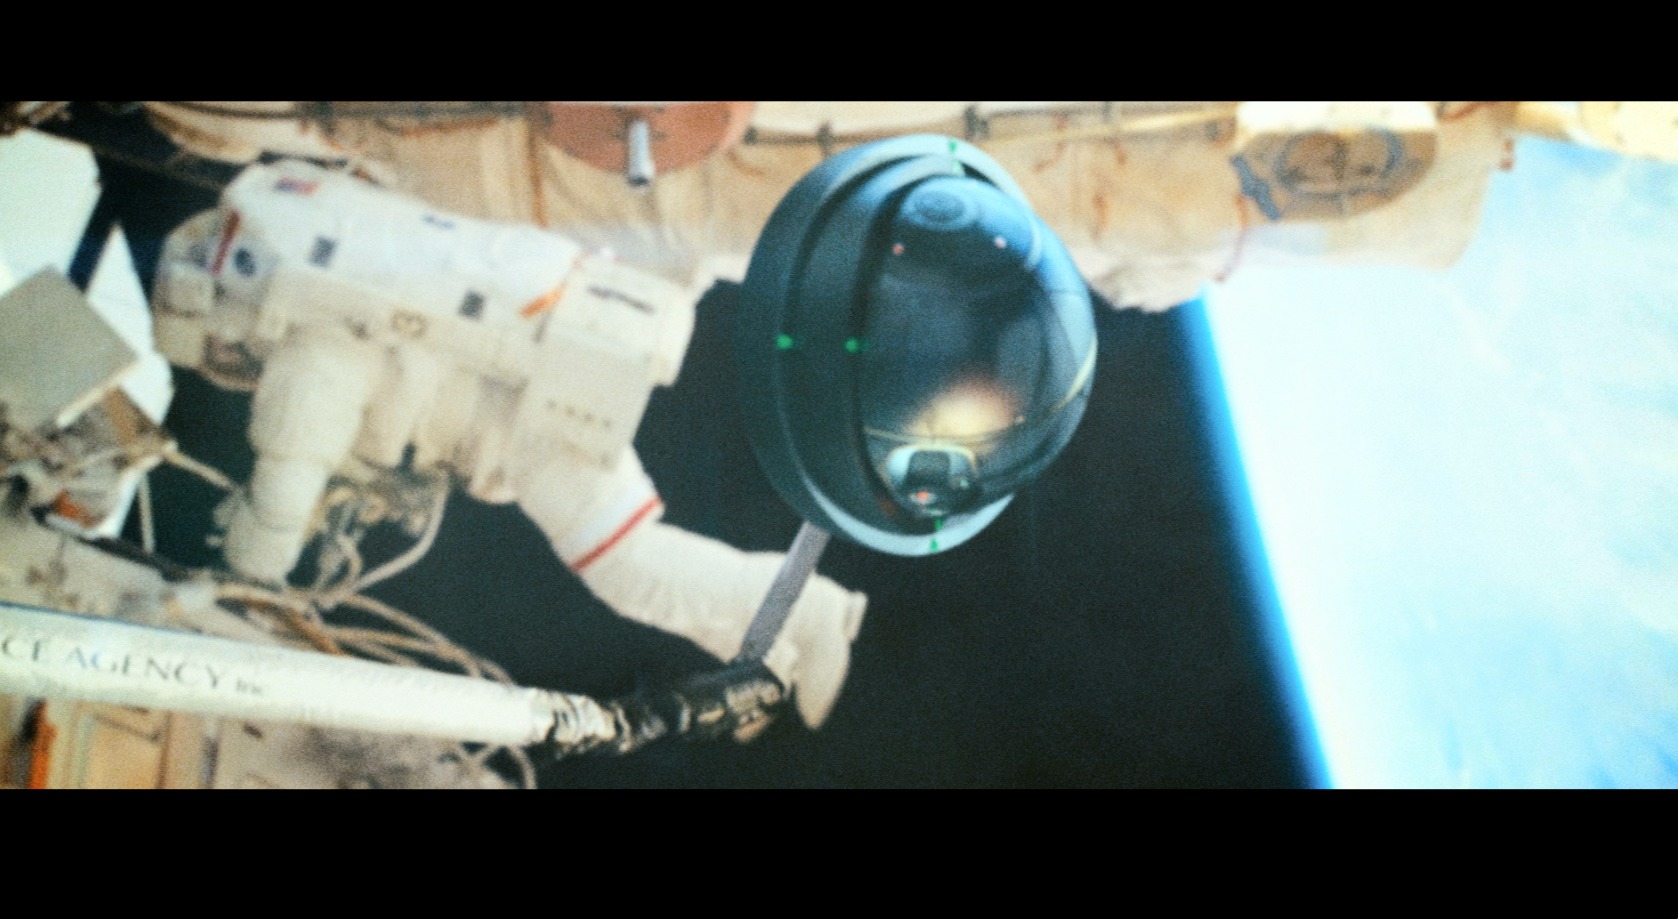 Frame from Project Kronos short film.